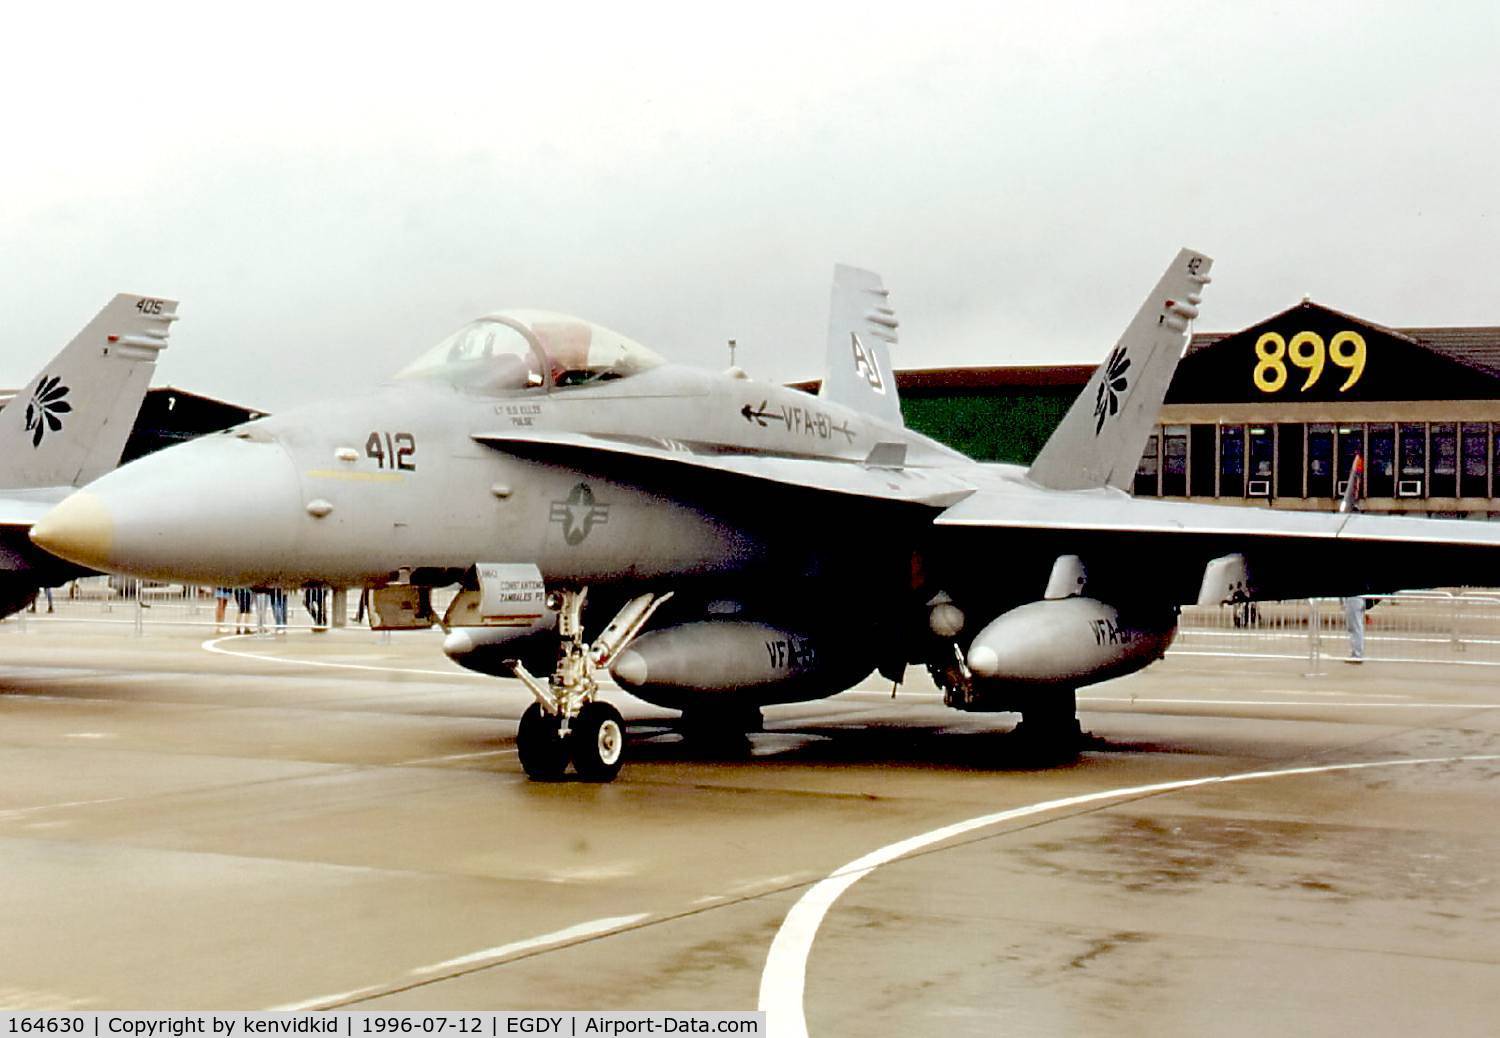 164630, 1991 McDonnell Douglas F/A-18C Hornet C/N 1047/C259, At the 1996 photocall prior to the Yeovilton Air Show.